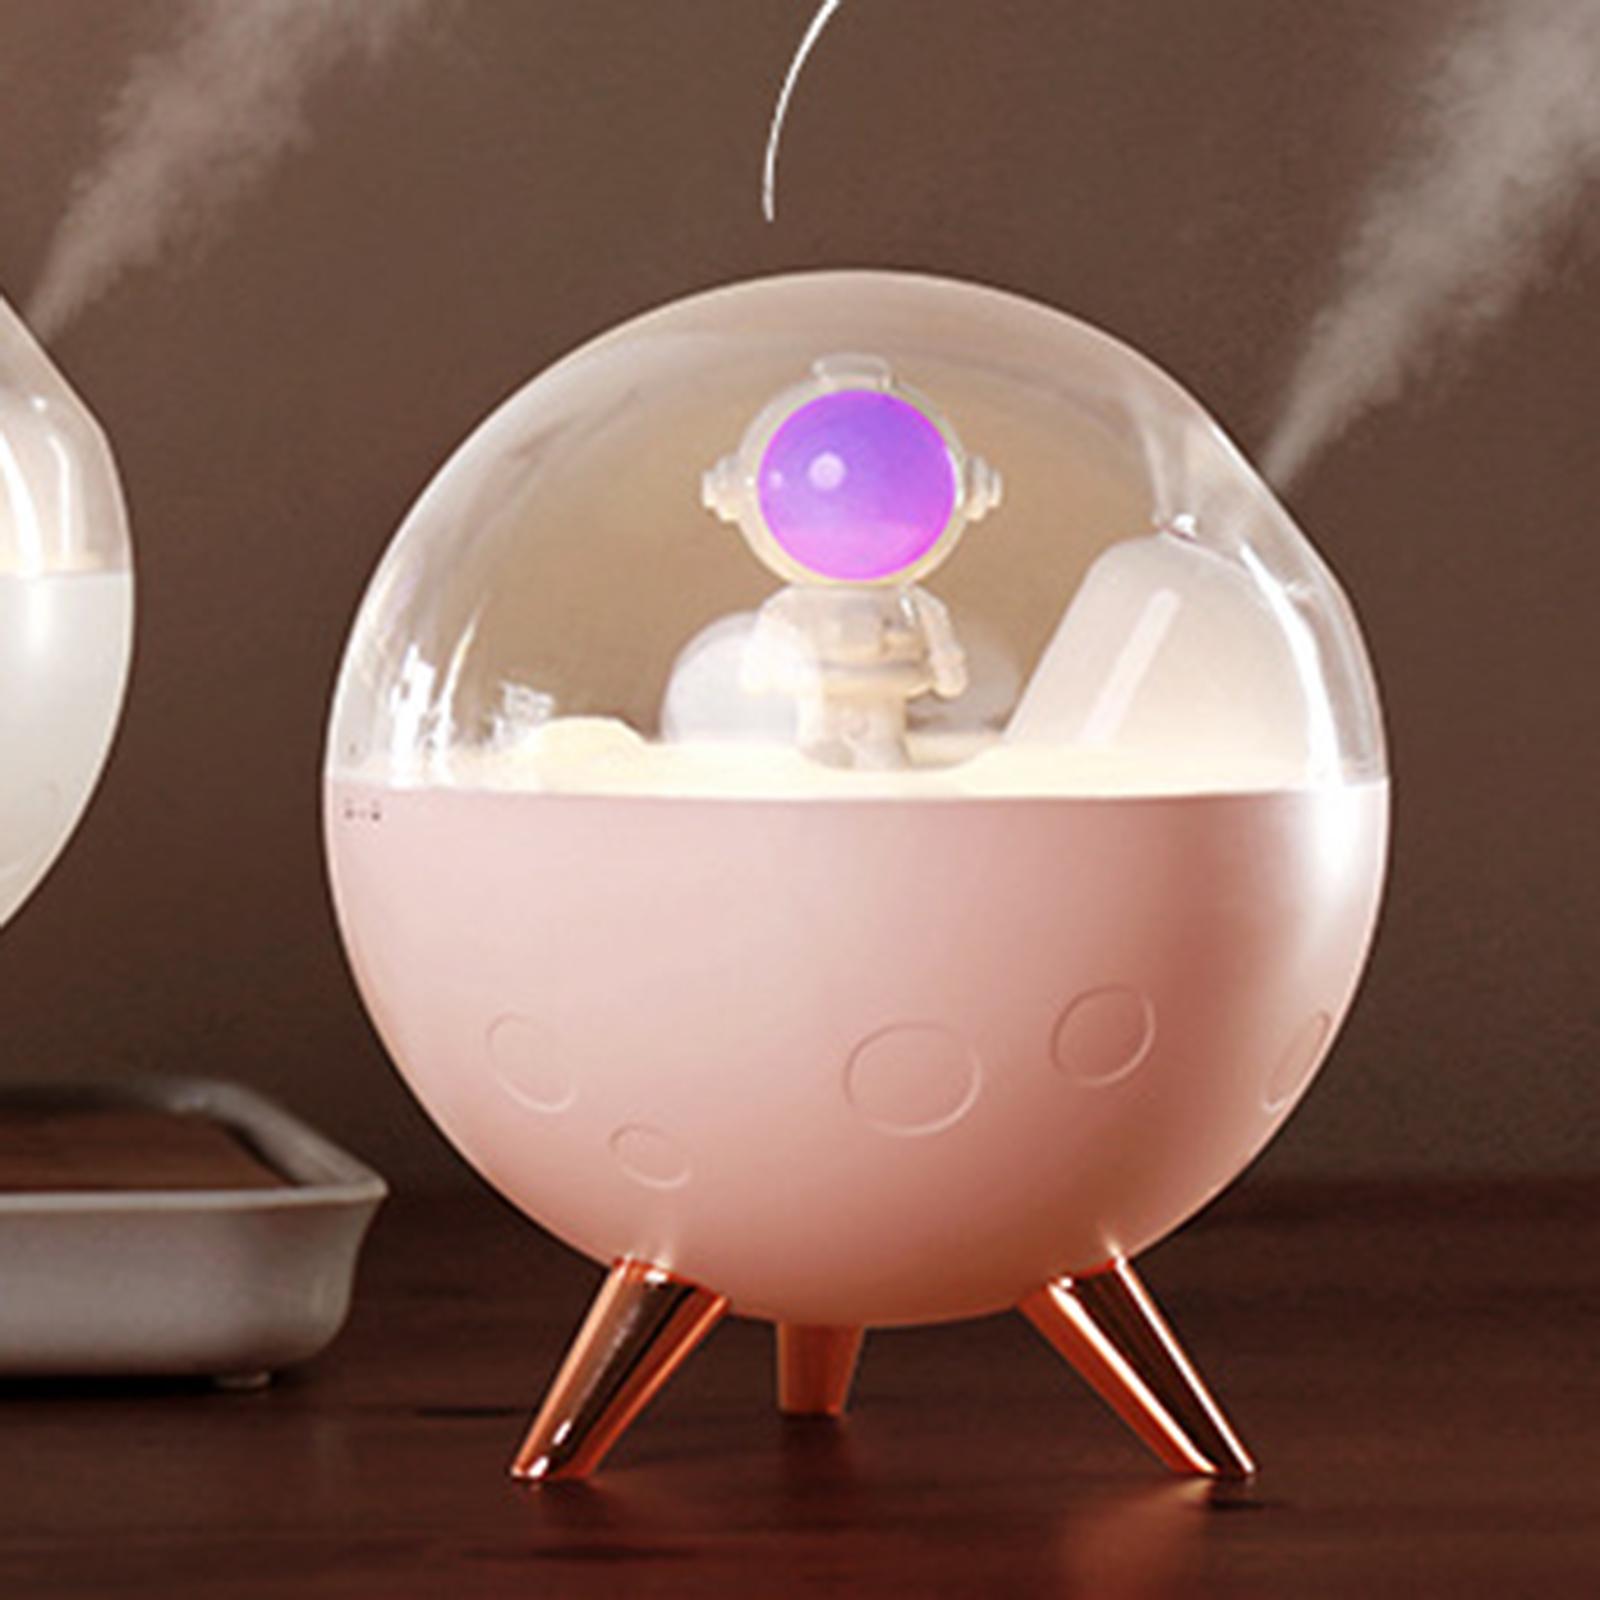 Air Humidifier Night Lamp Sculpture Accessories for Living Room Decor pink